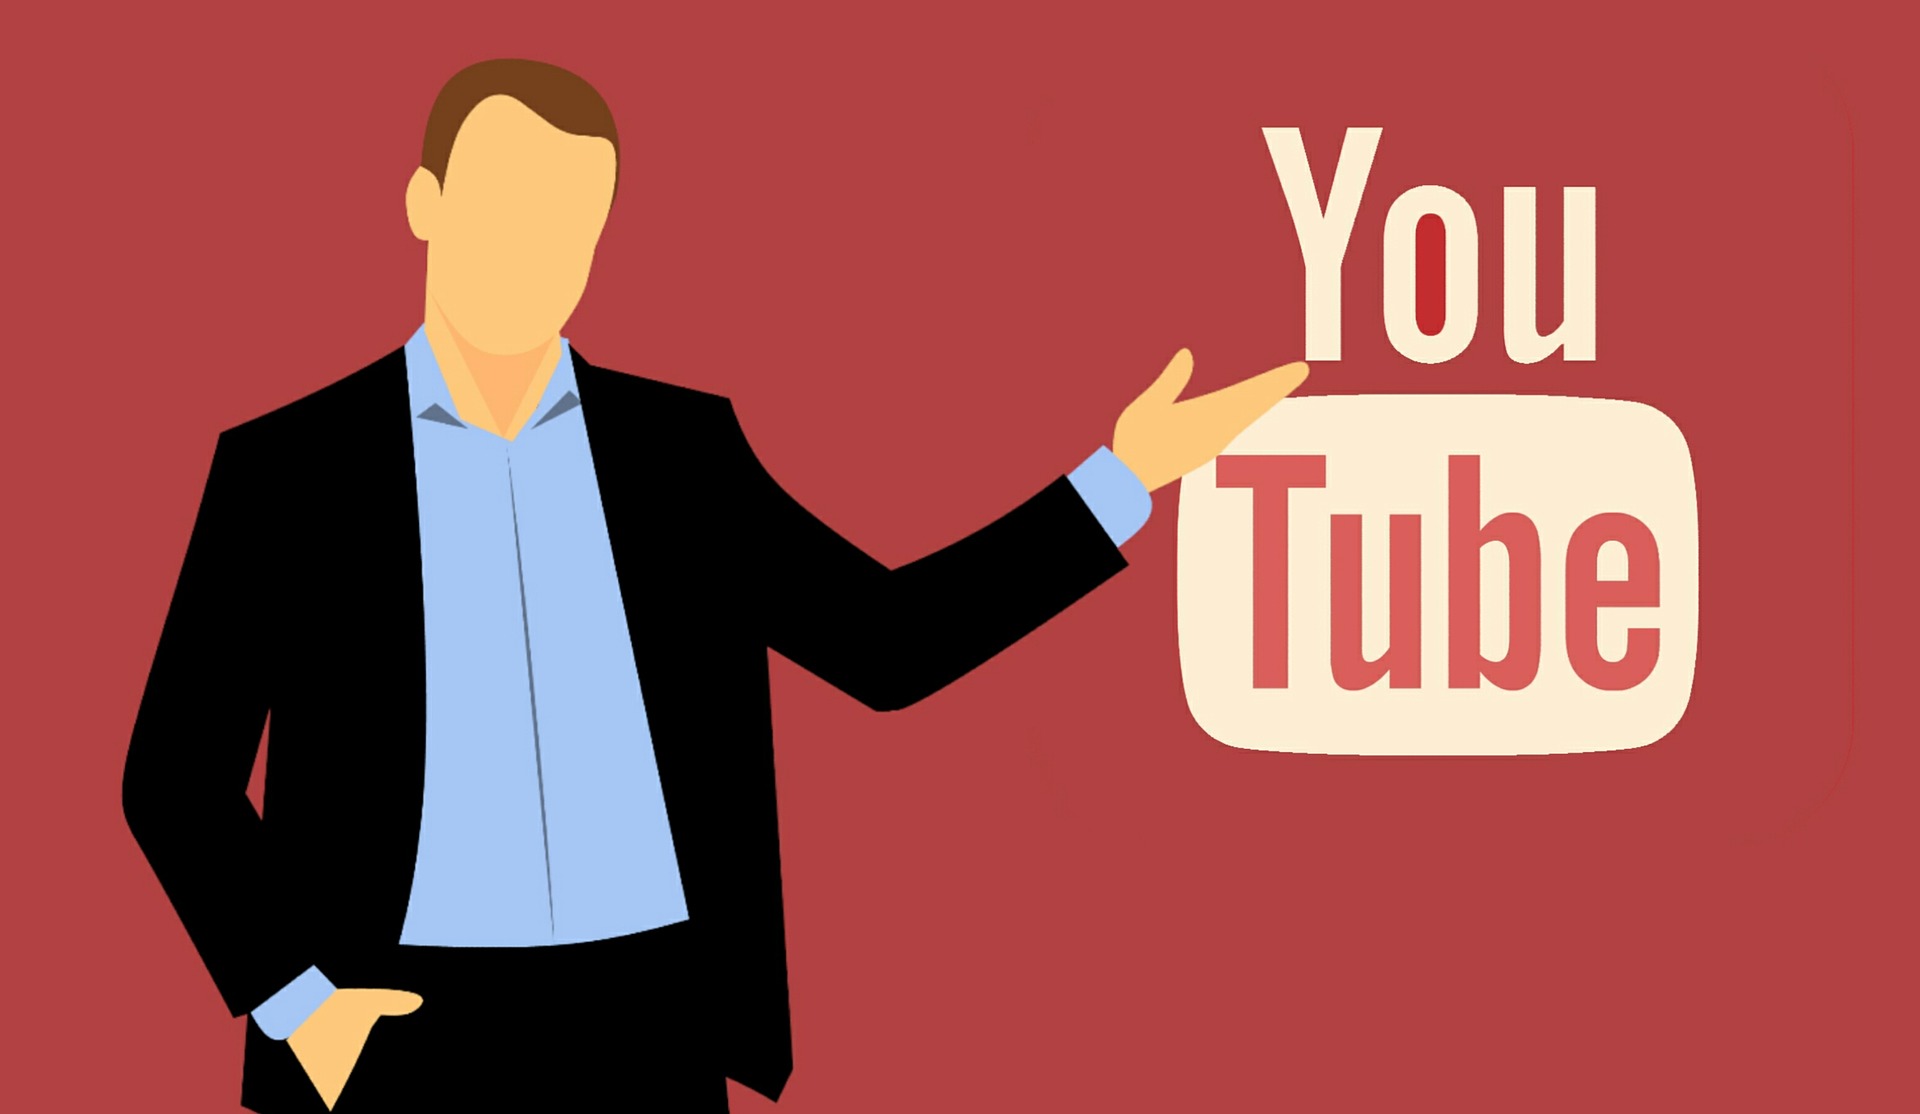 The longest youtube video: how long will it take you to watch?